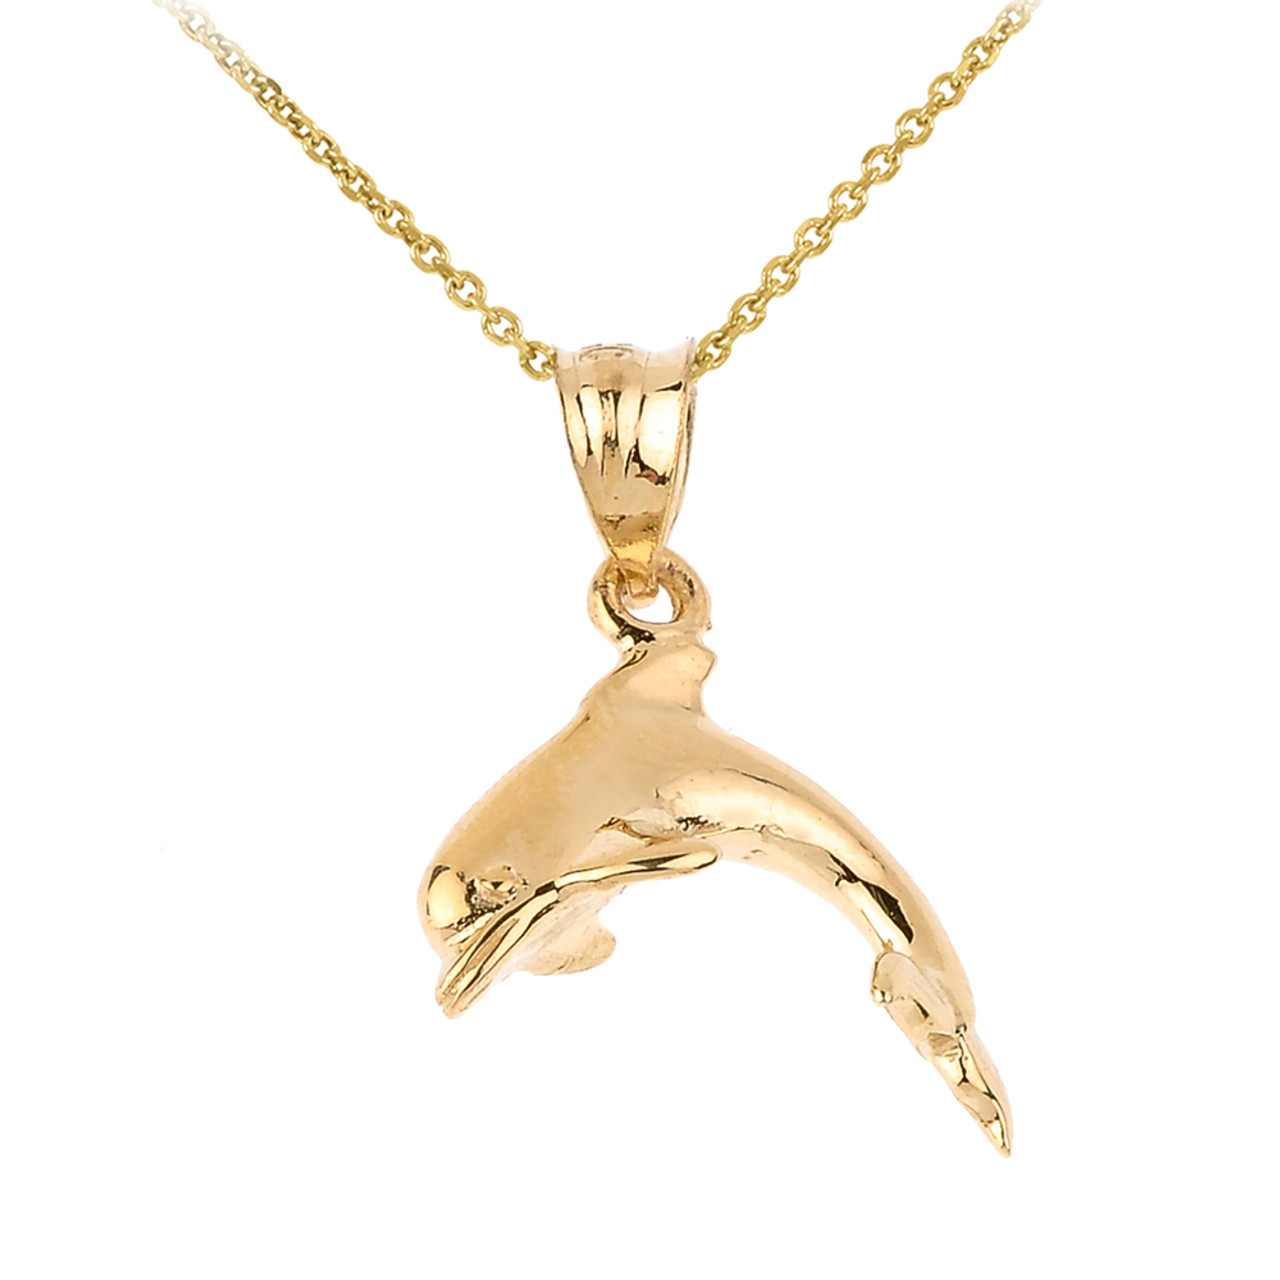 SOLID 14KT GOLD DOLPHIN CHARM TWO TONE DIAMOND CUT PENDANT NECKLACE